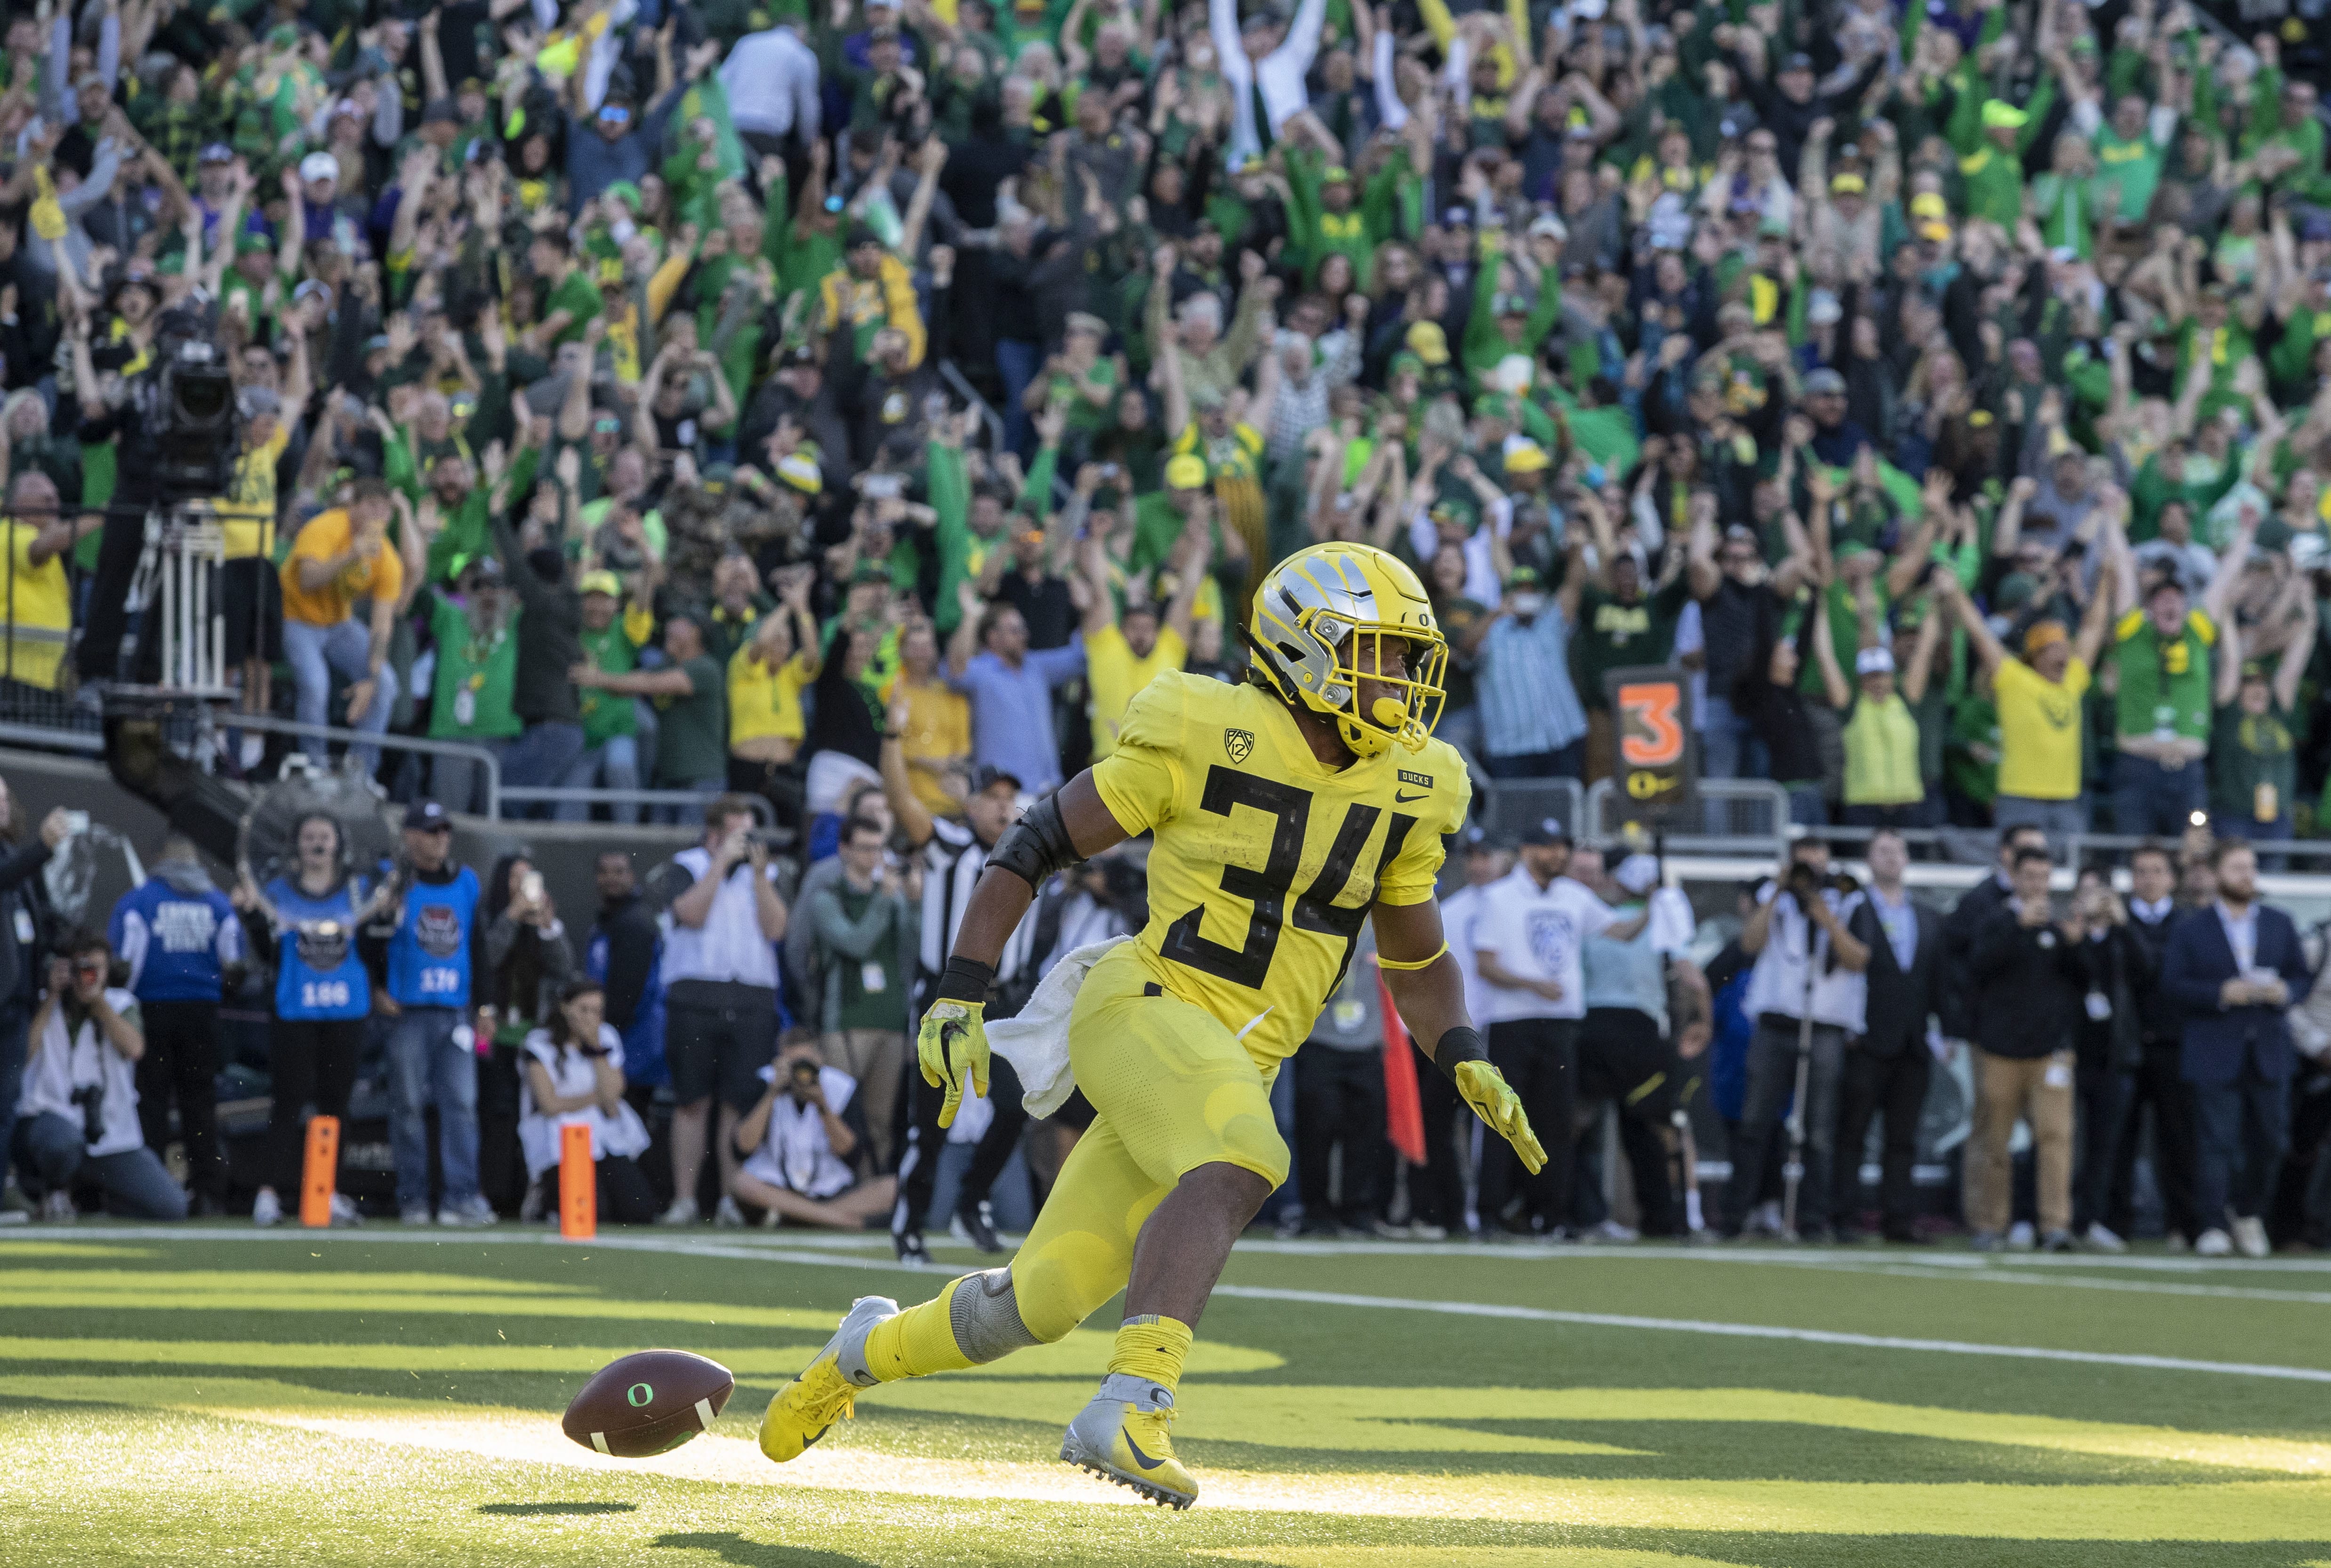 Oregon running back CJ Verdell (34), scores the winning touchdown in overtime to beat Washington 30-27 in an NCAA college football game in Eugene, Ore., Saturday, Oct. 13, 2018.